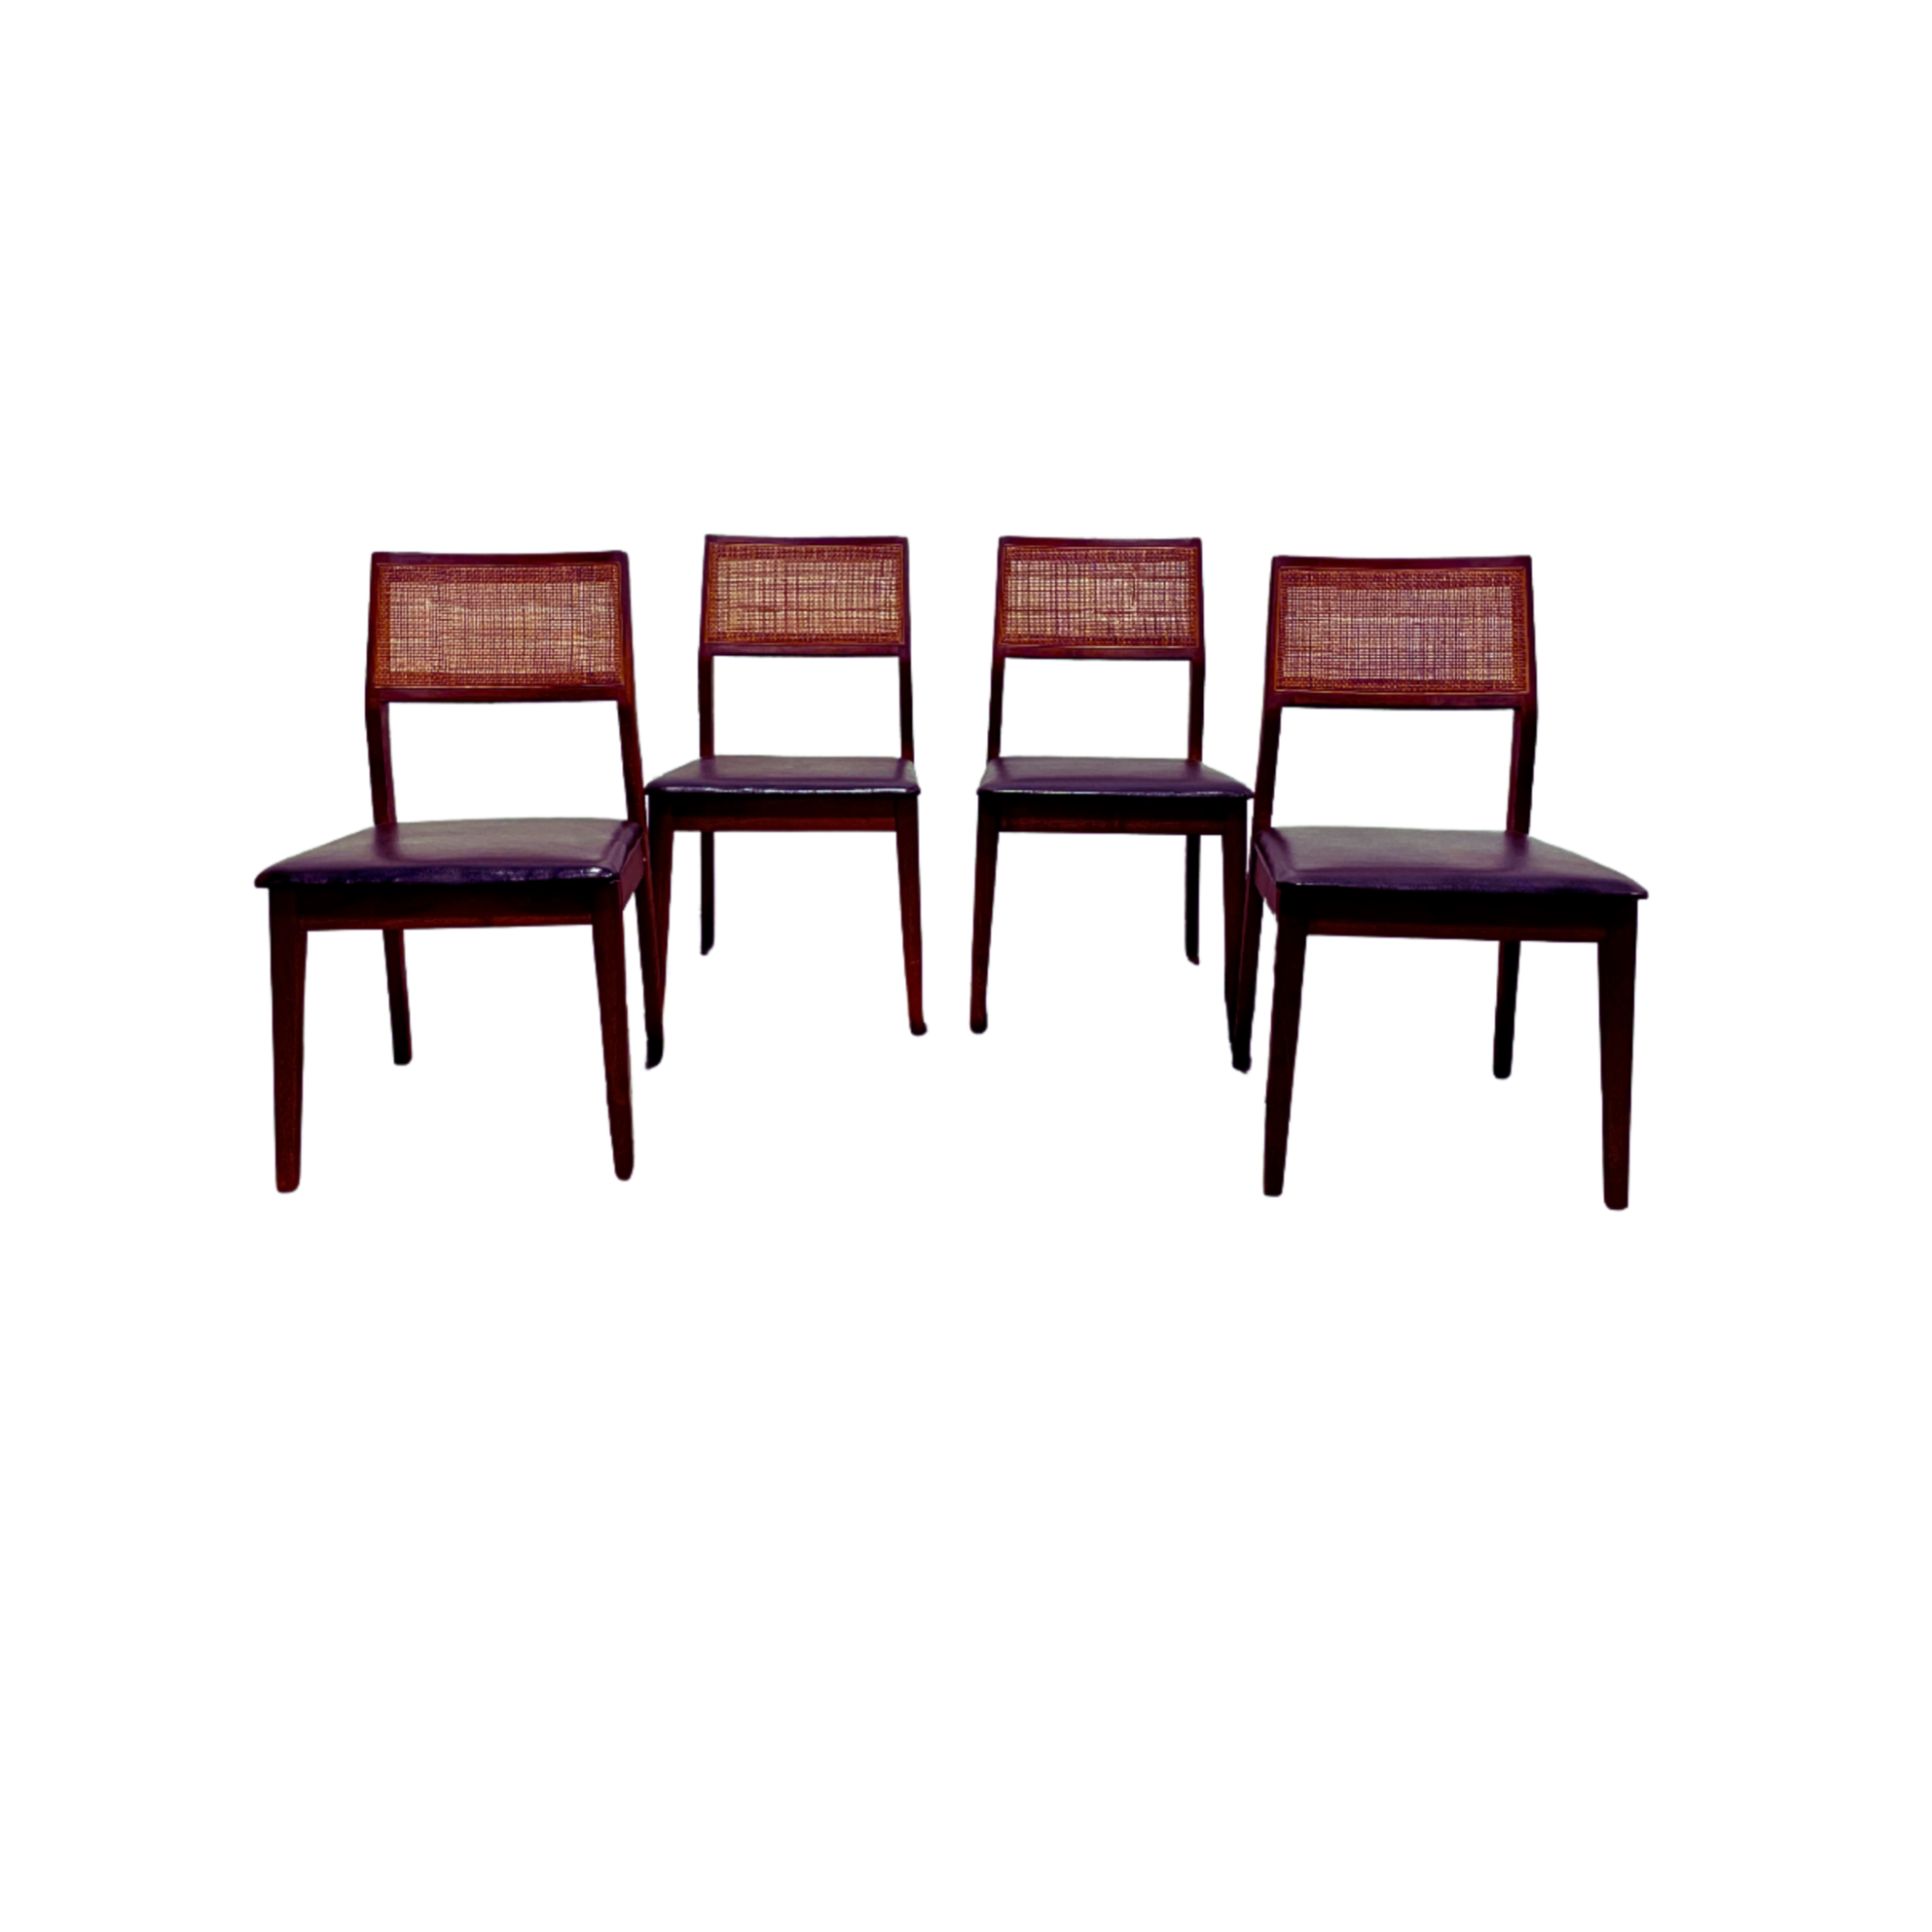 WALNUT Mid Century Modern CANED Dining CHAIRS, Set of Four